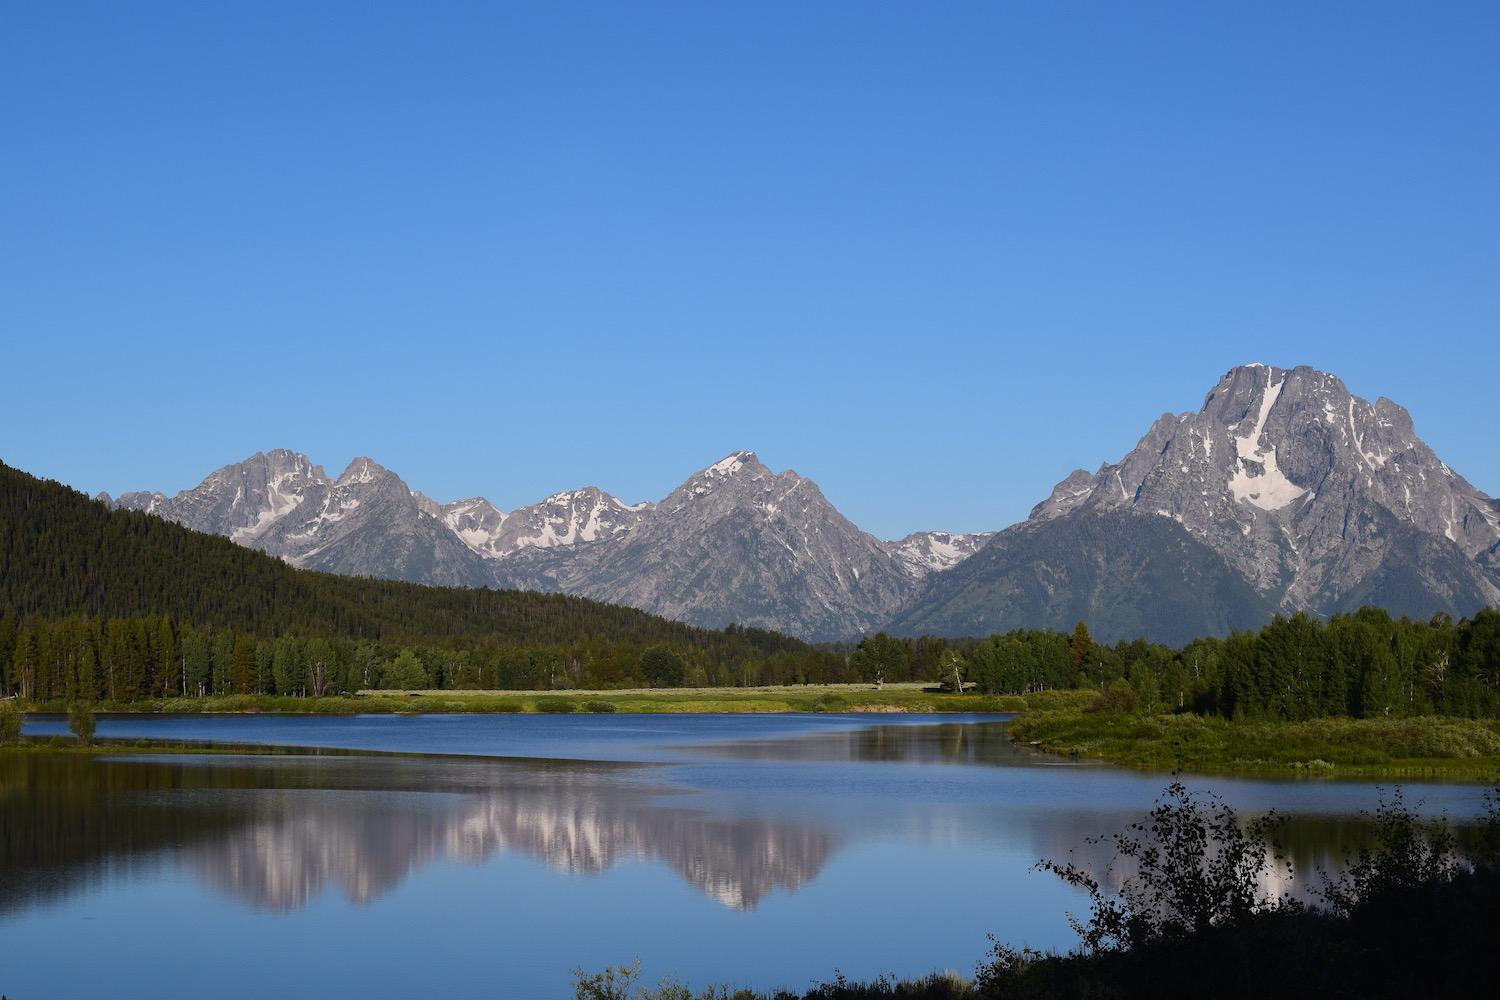 A photo of the Grand Tetons and a lake, with a reflection of the mountains in the water.